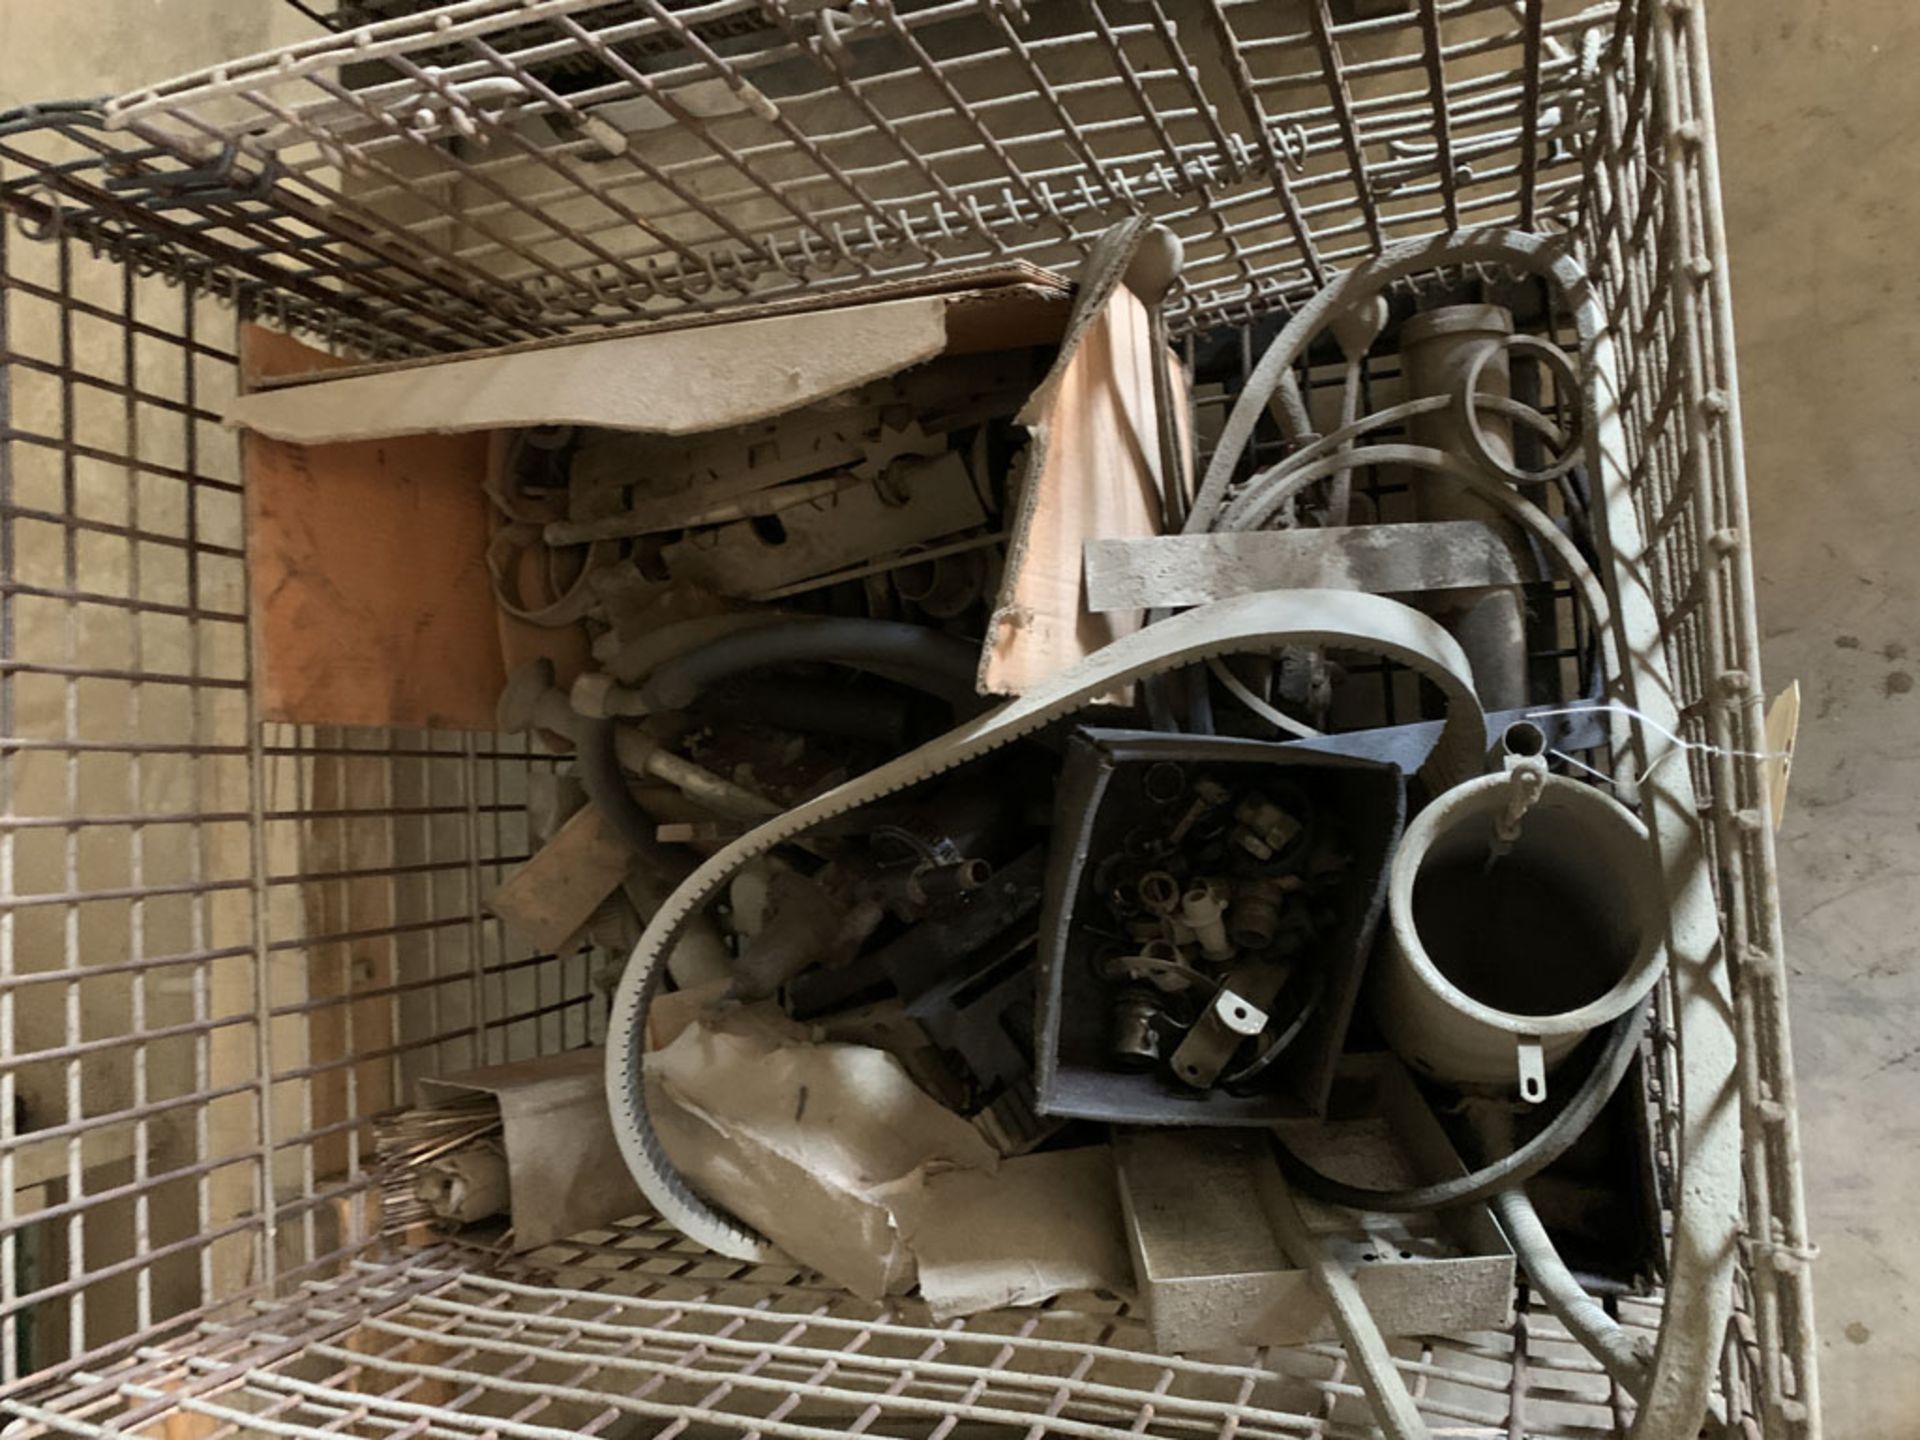 Contents of wire crate